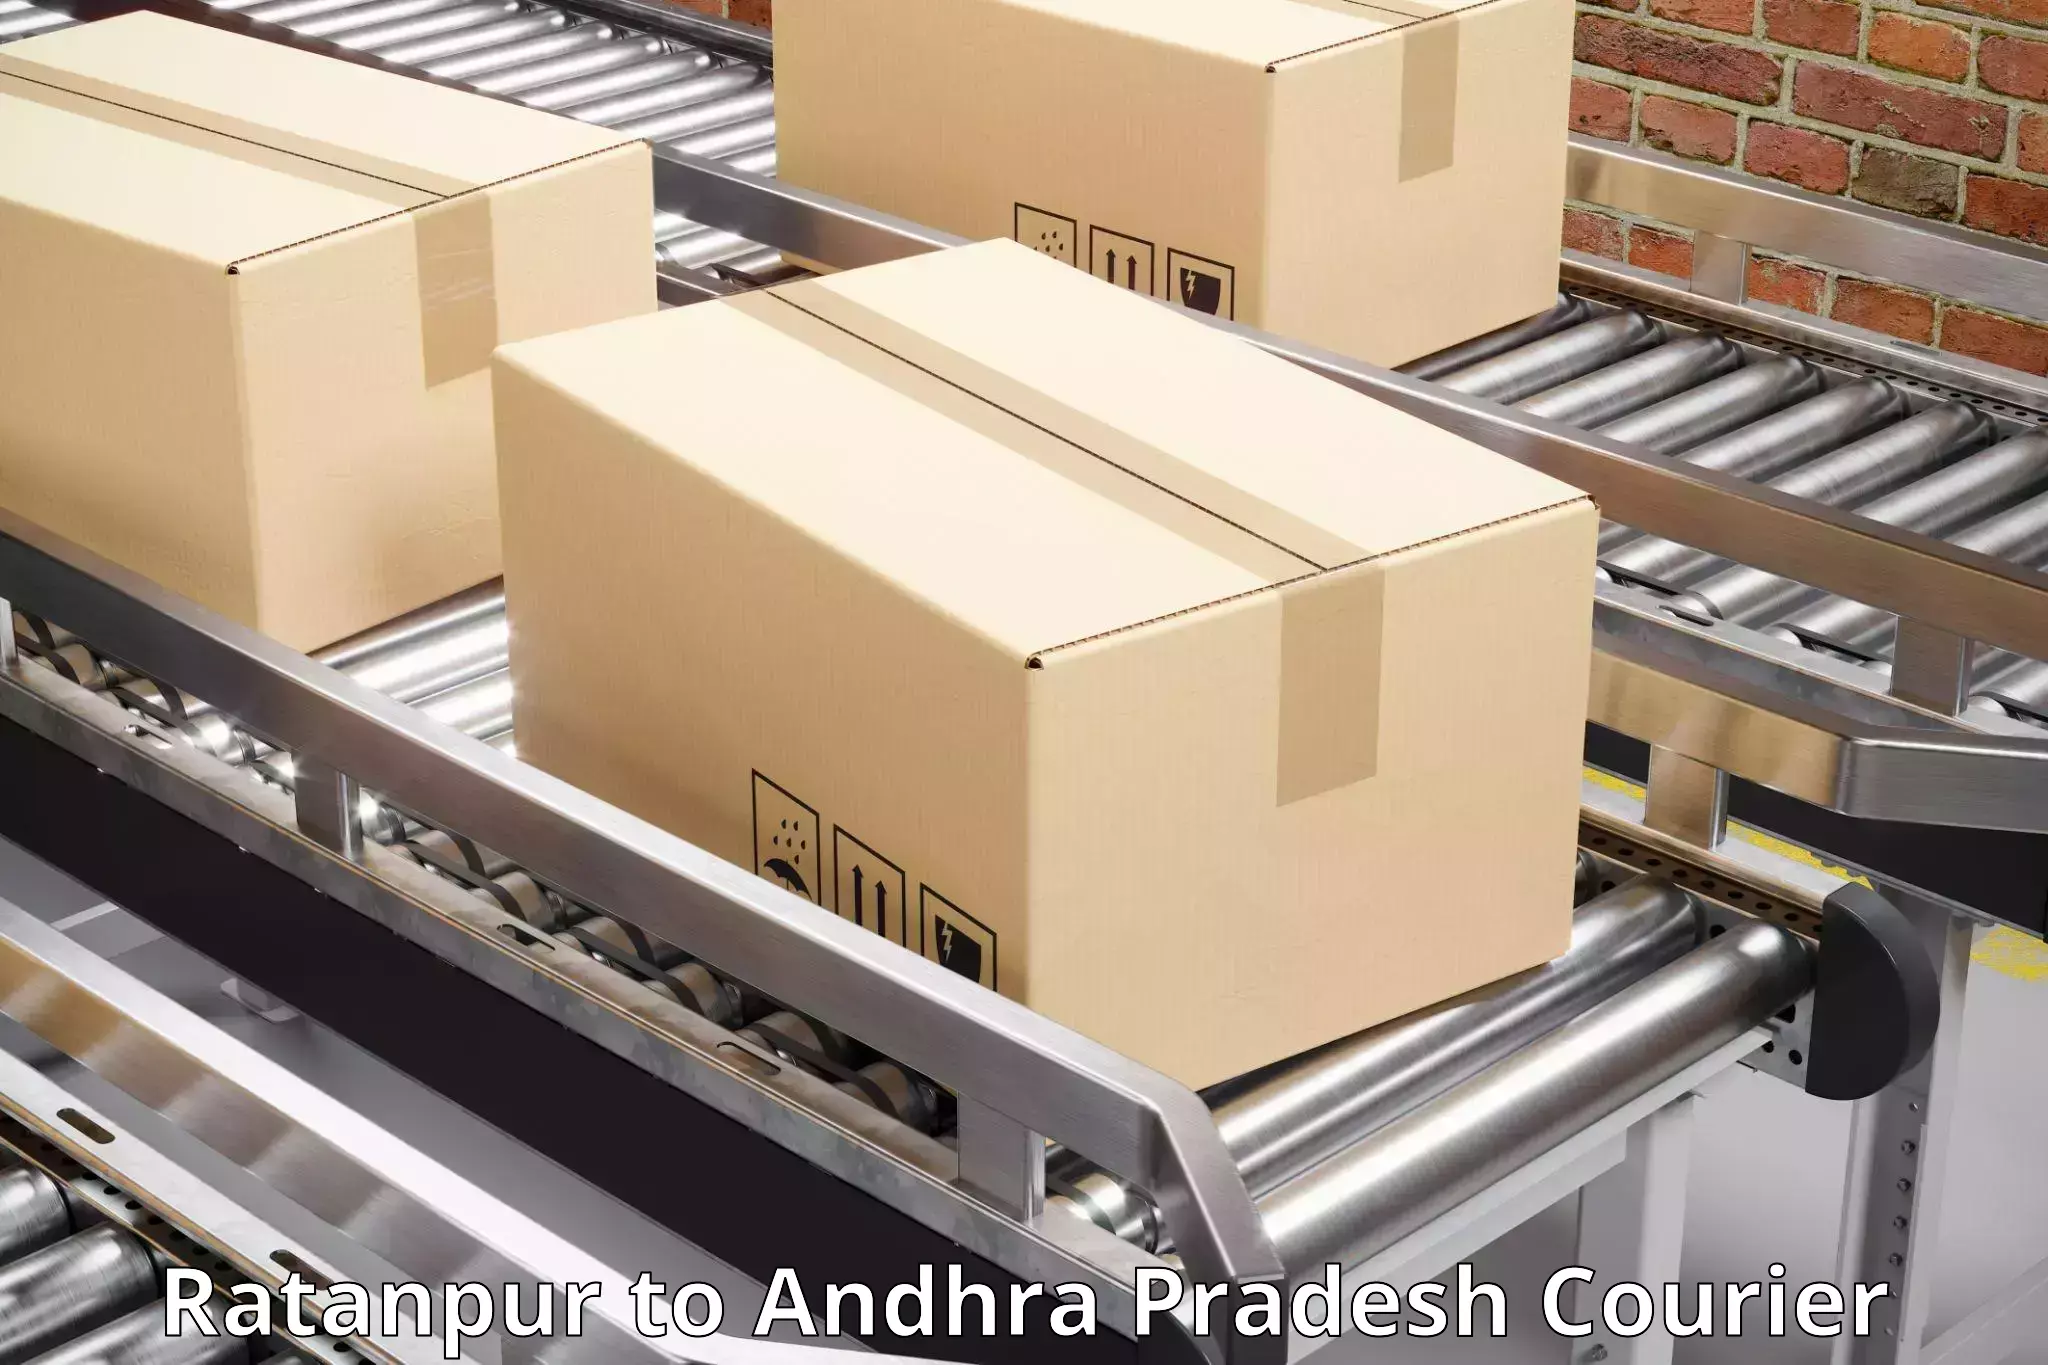 Comprehensive shipping strategies in Ratanpur to Gullapalli